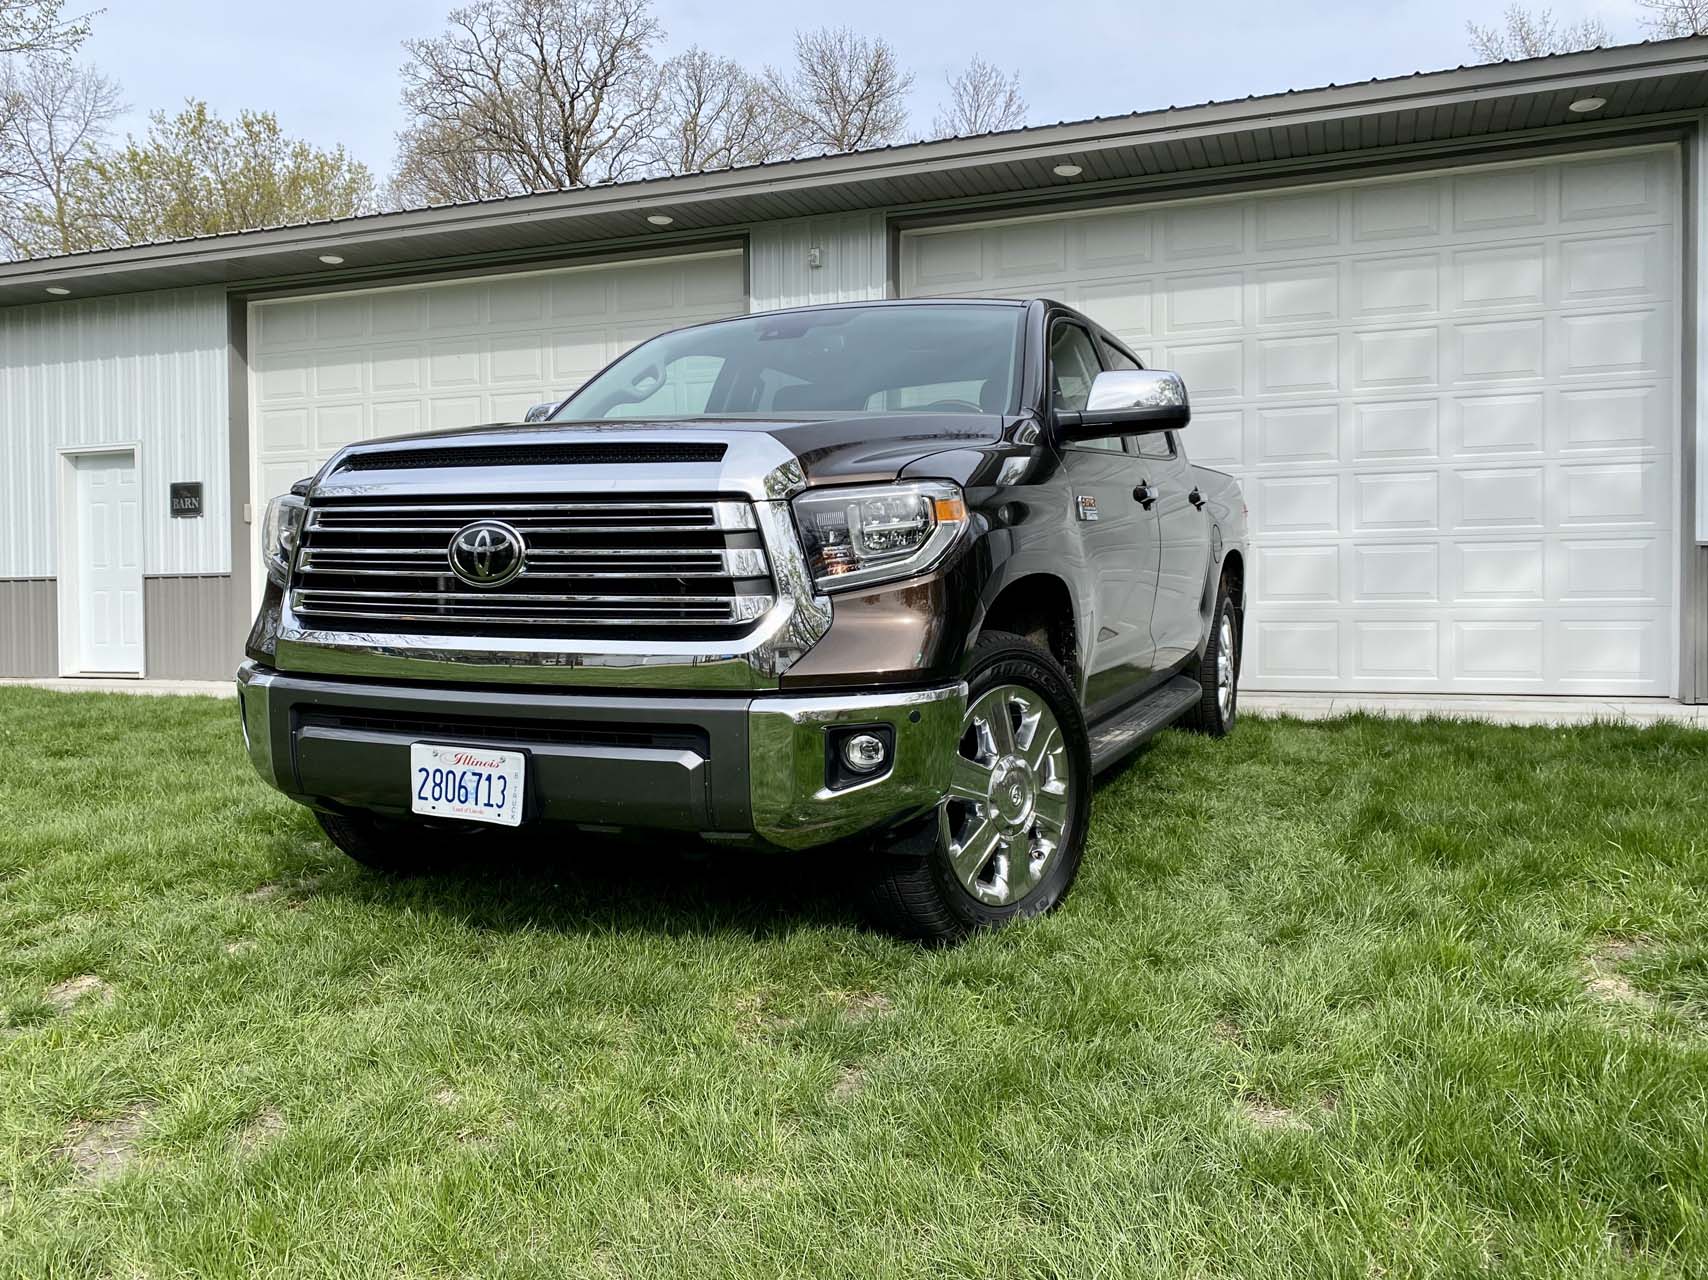 Review update: The 2020 Toyota Tundra 1794 Edition asks what you need